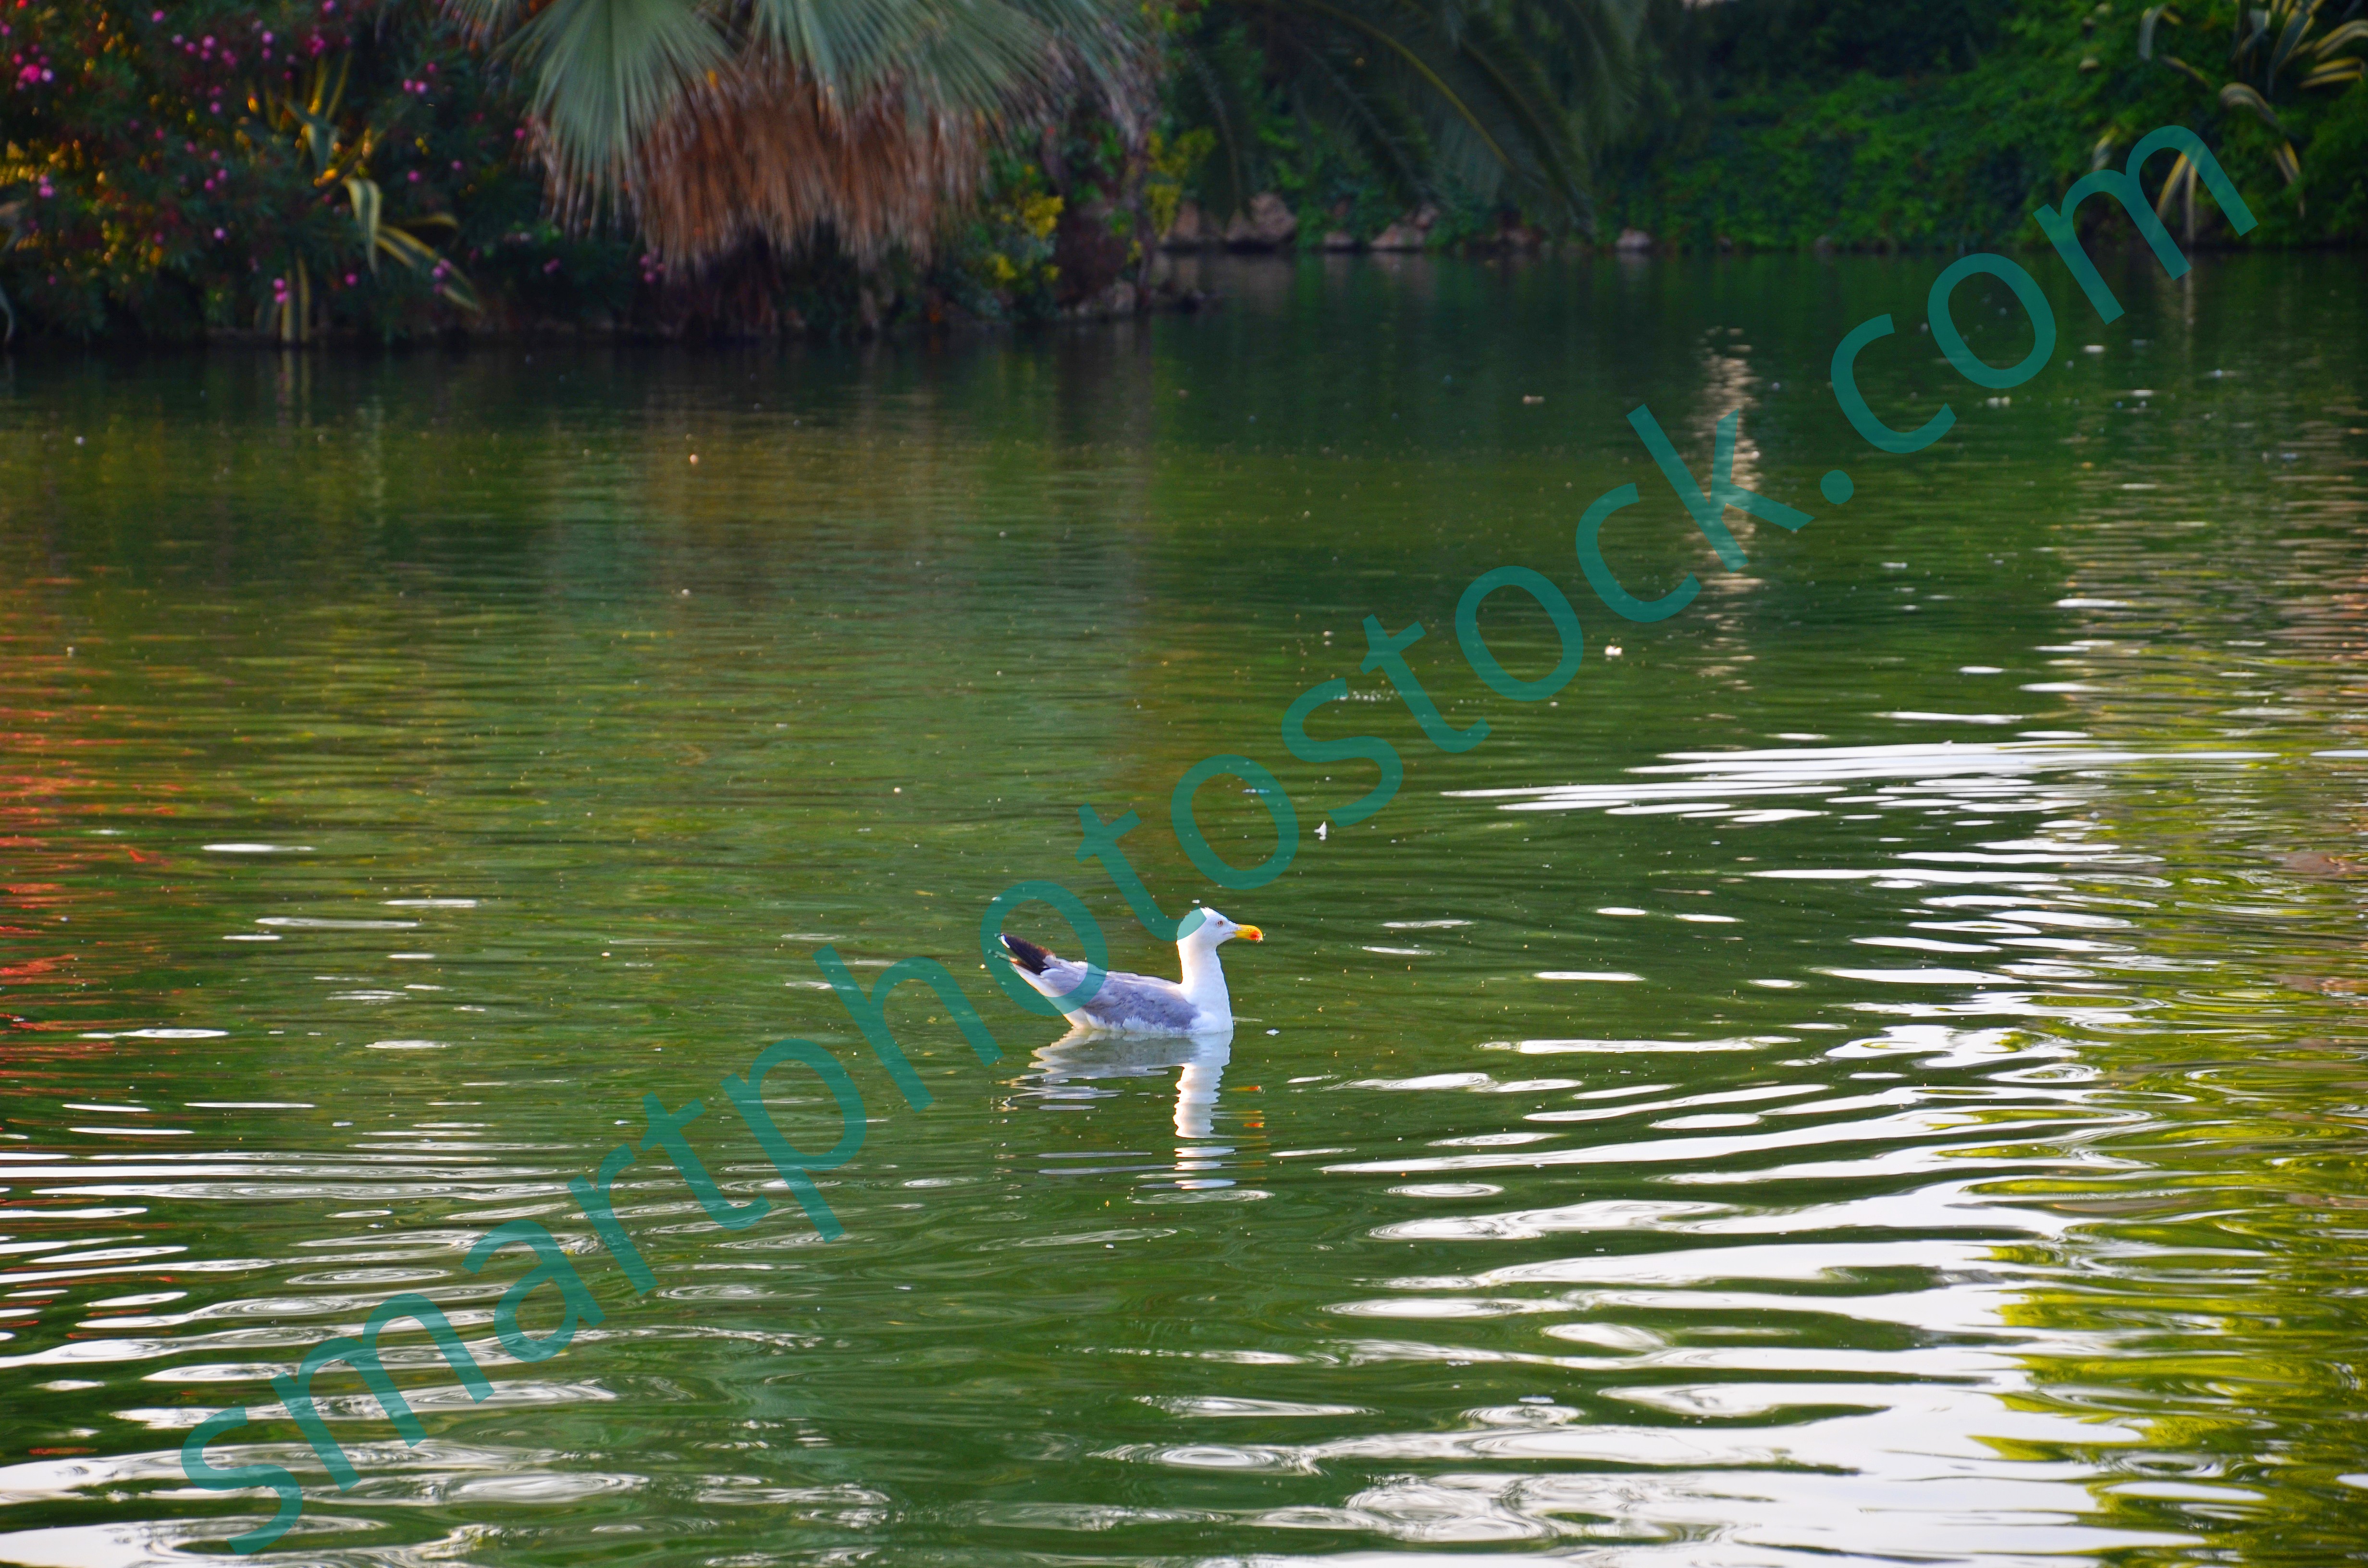 seagull swimming in a pond - Smart Photo Stock